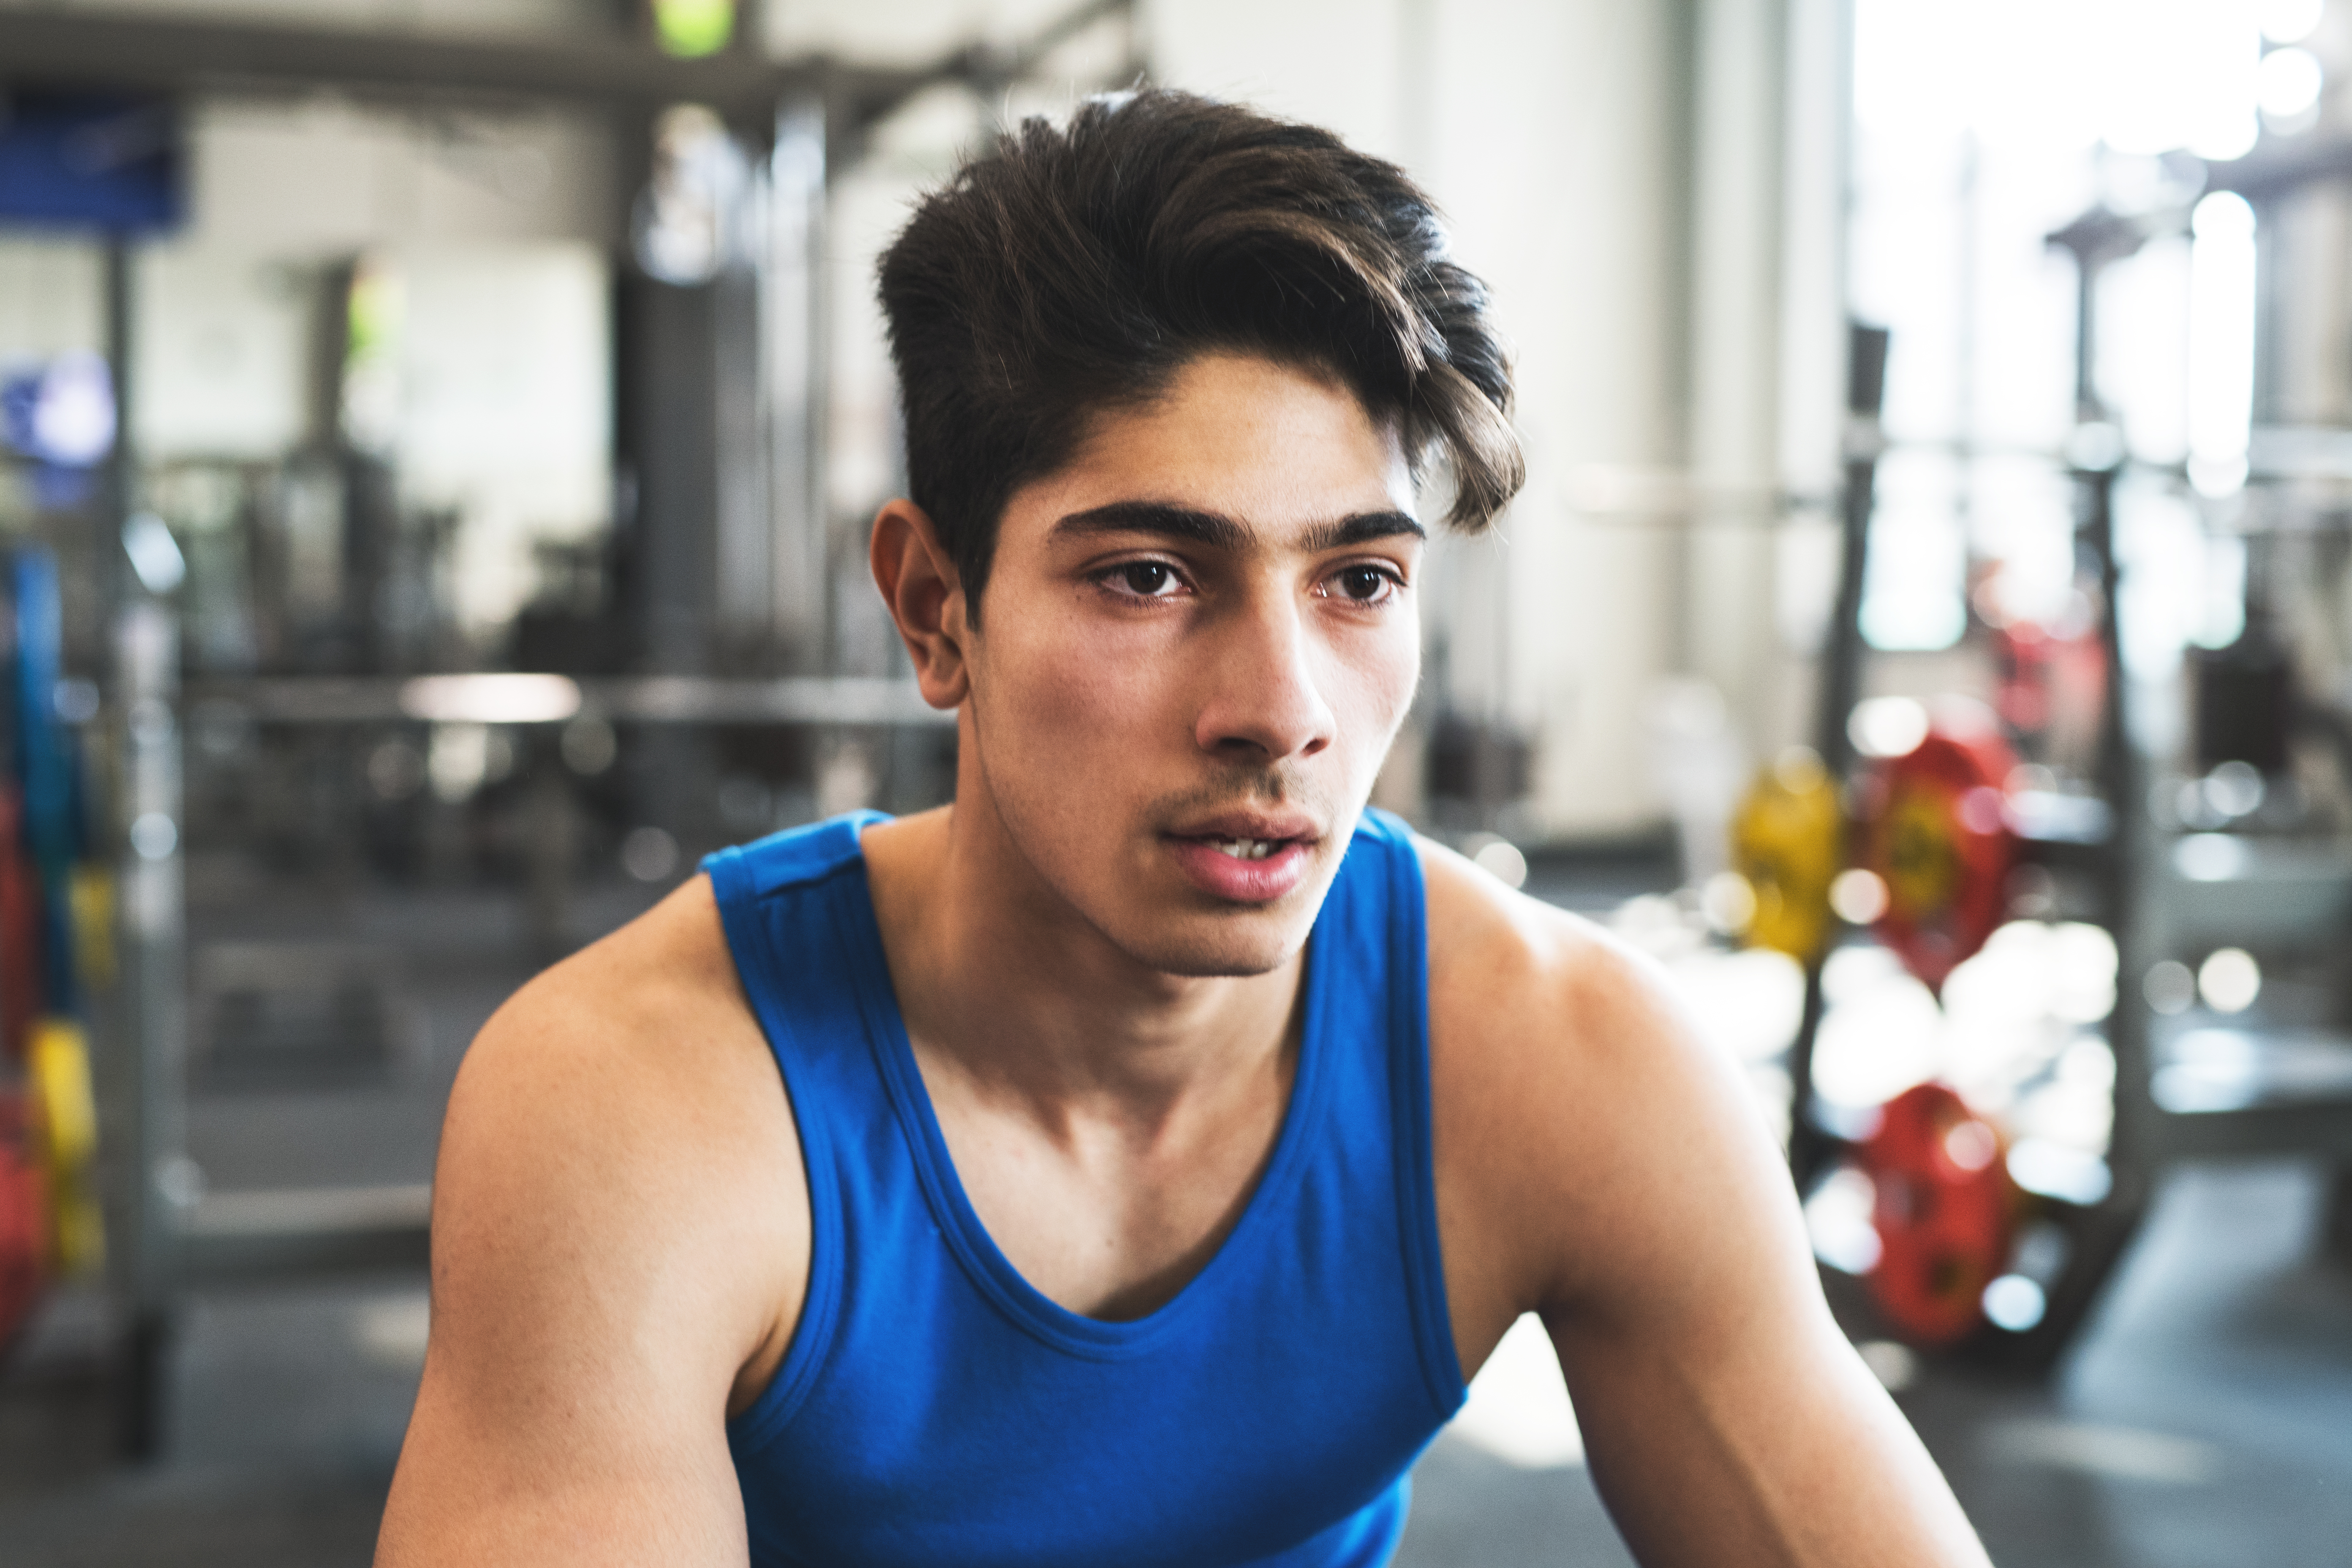 Muscle-building obsession in boys